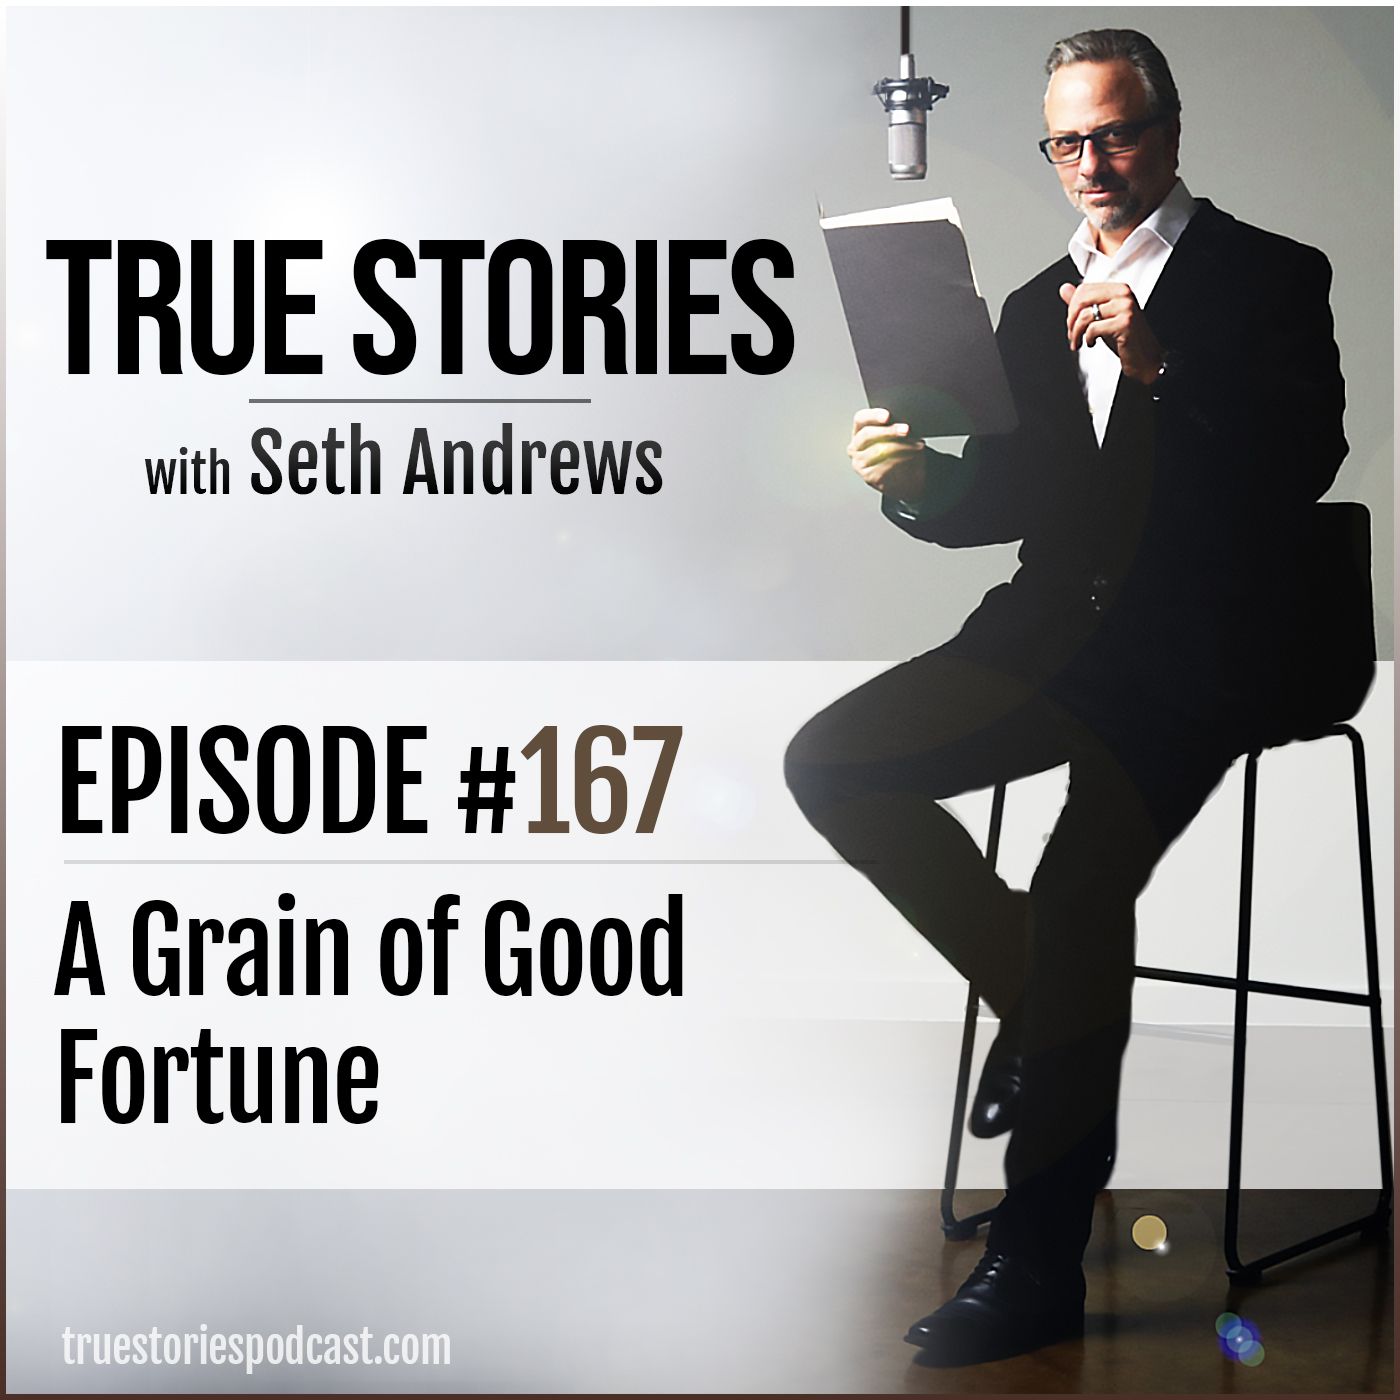 True Stories #167 - A Grain of Good Fortune